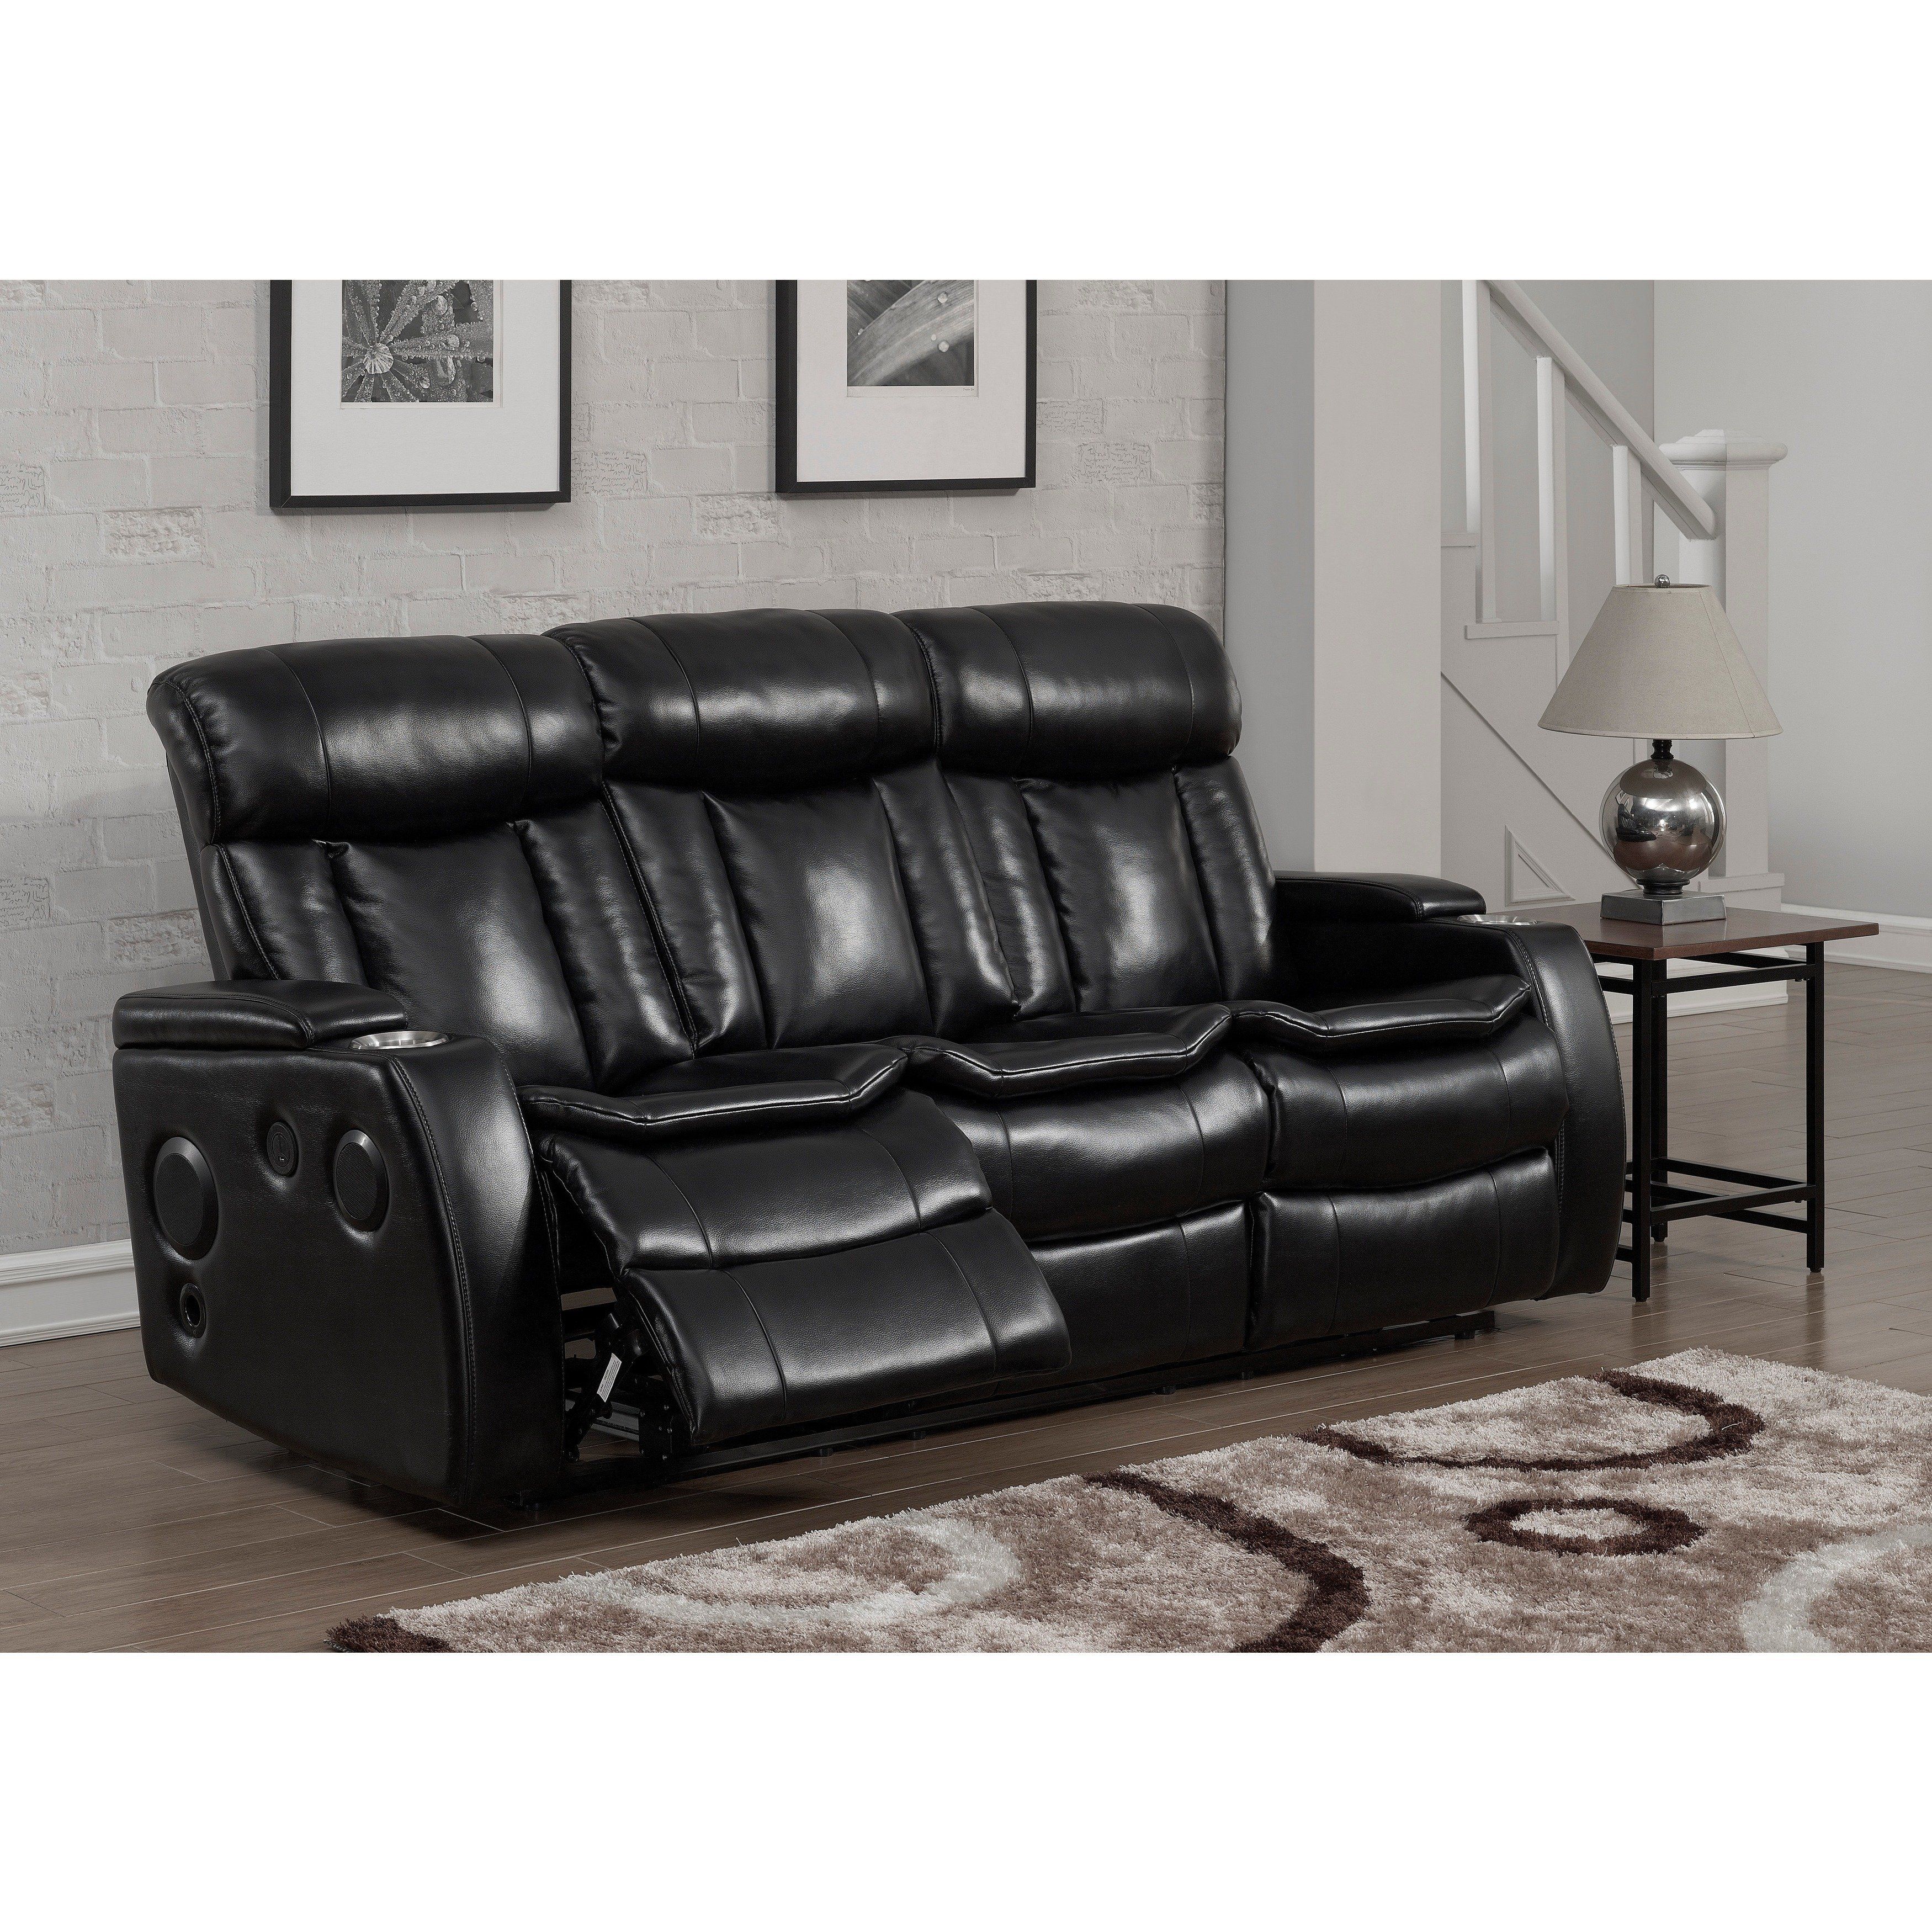 Delano Power Reclining Sofa With Usb | Baci Living Room With Regard To Delano Smoke 3 Piece Sectionals (View 10 of 30)